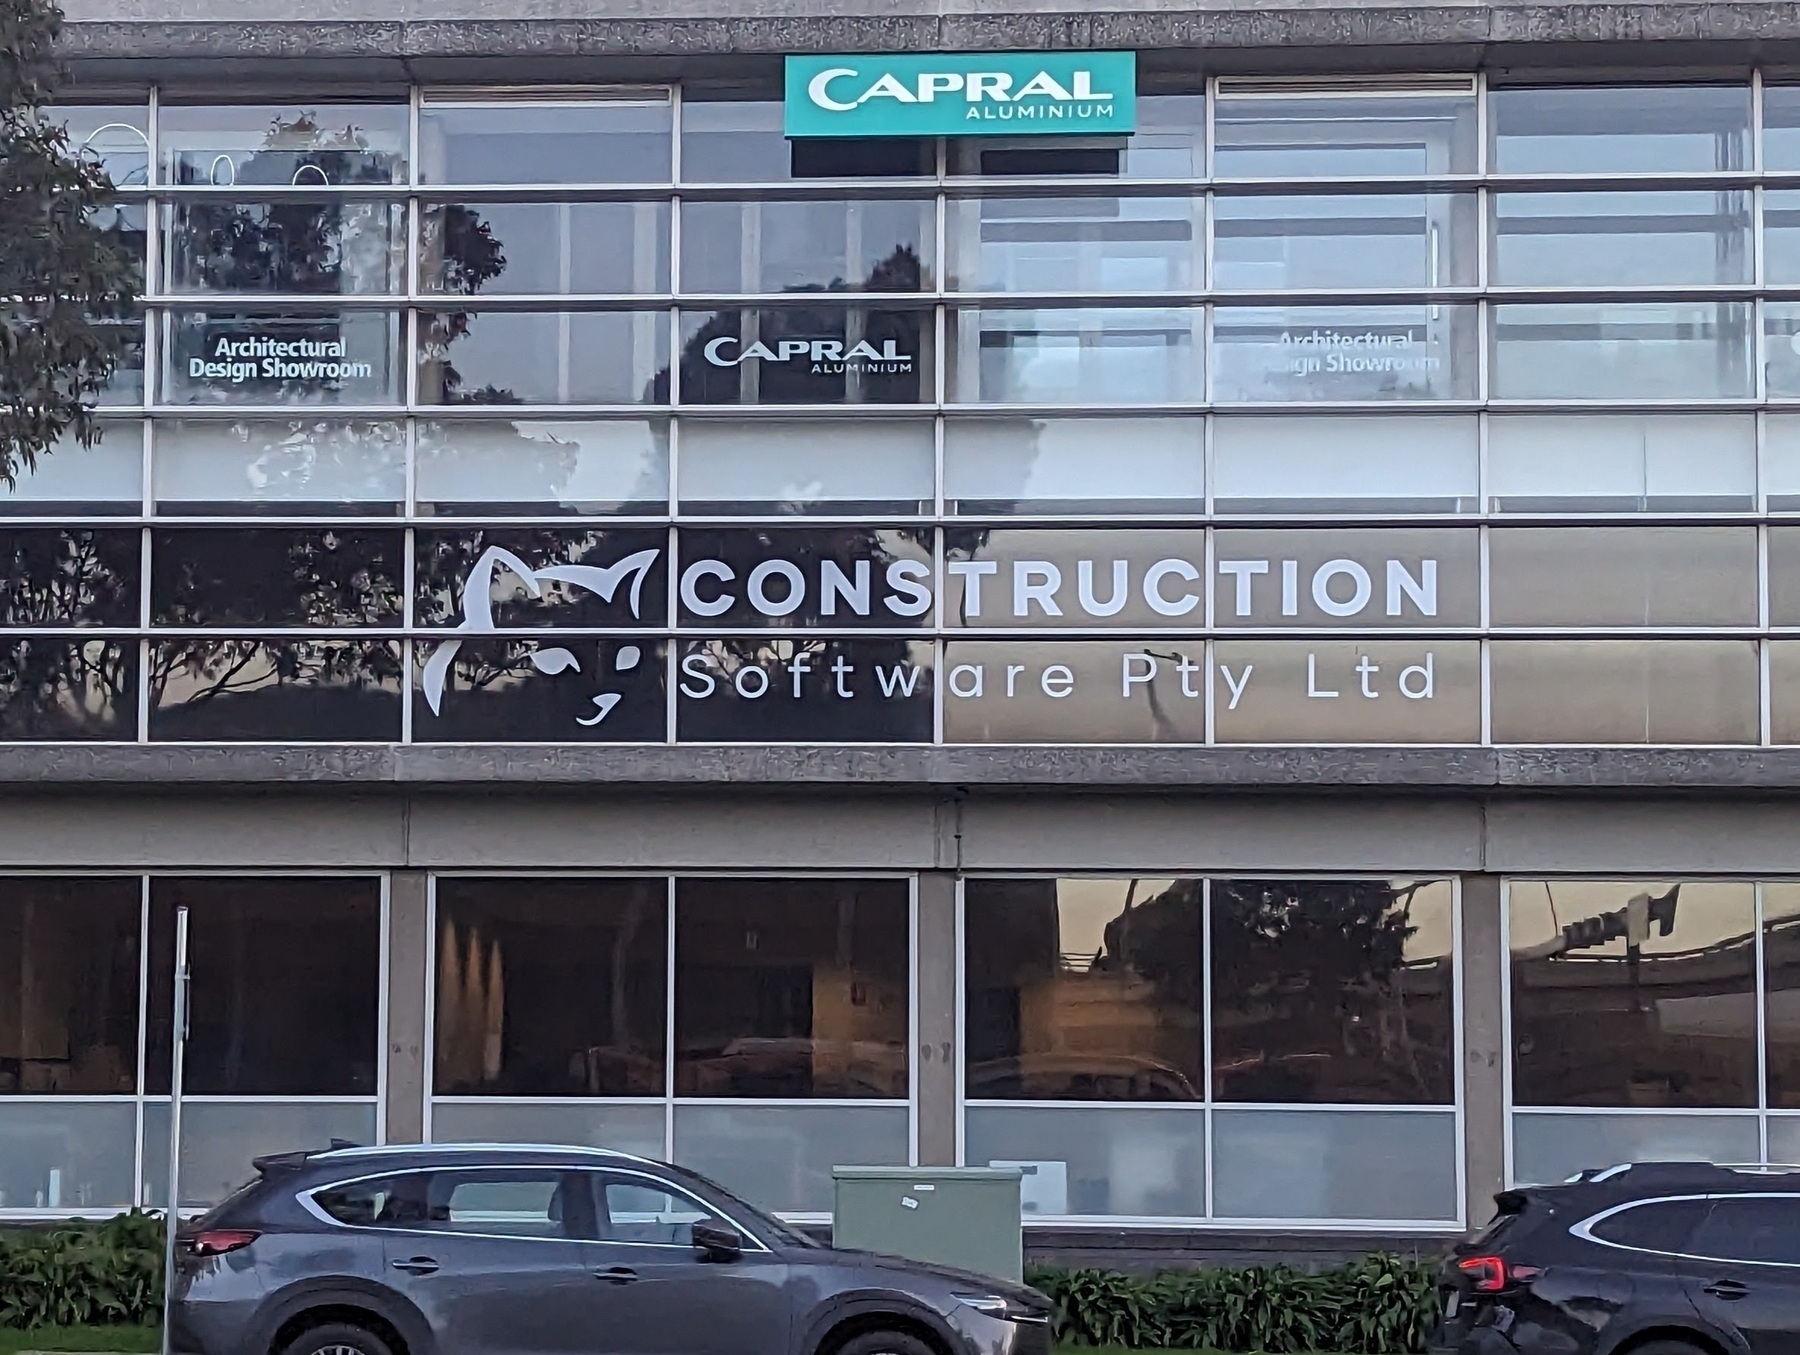 A business sign painted on the side of a glass building that reads: Construction Software Pty Ltd